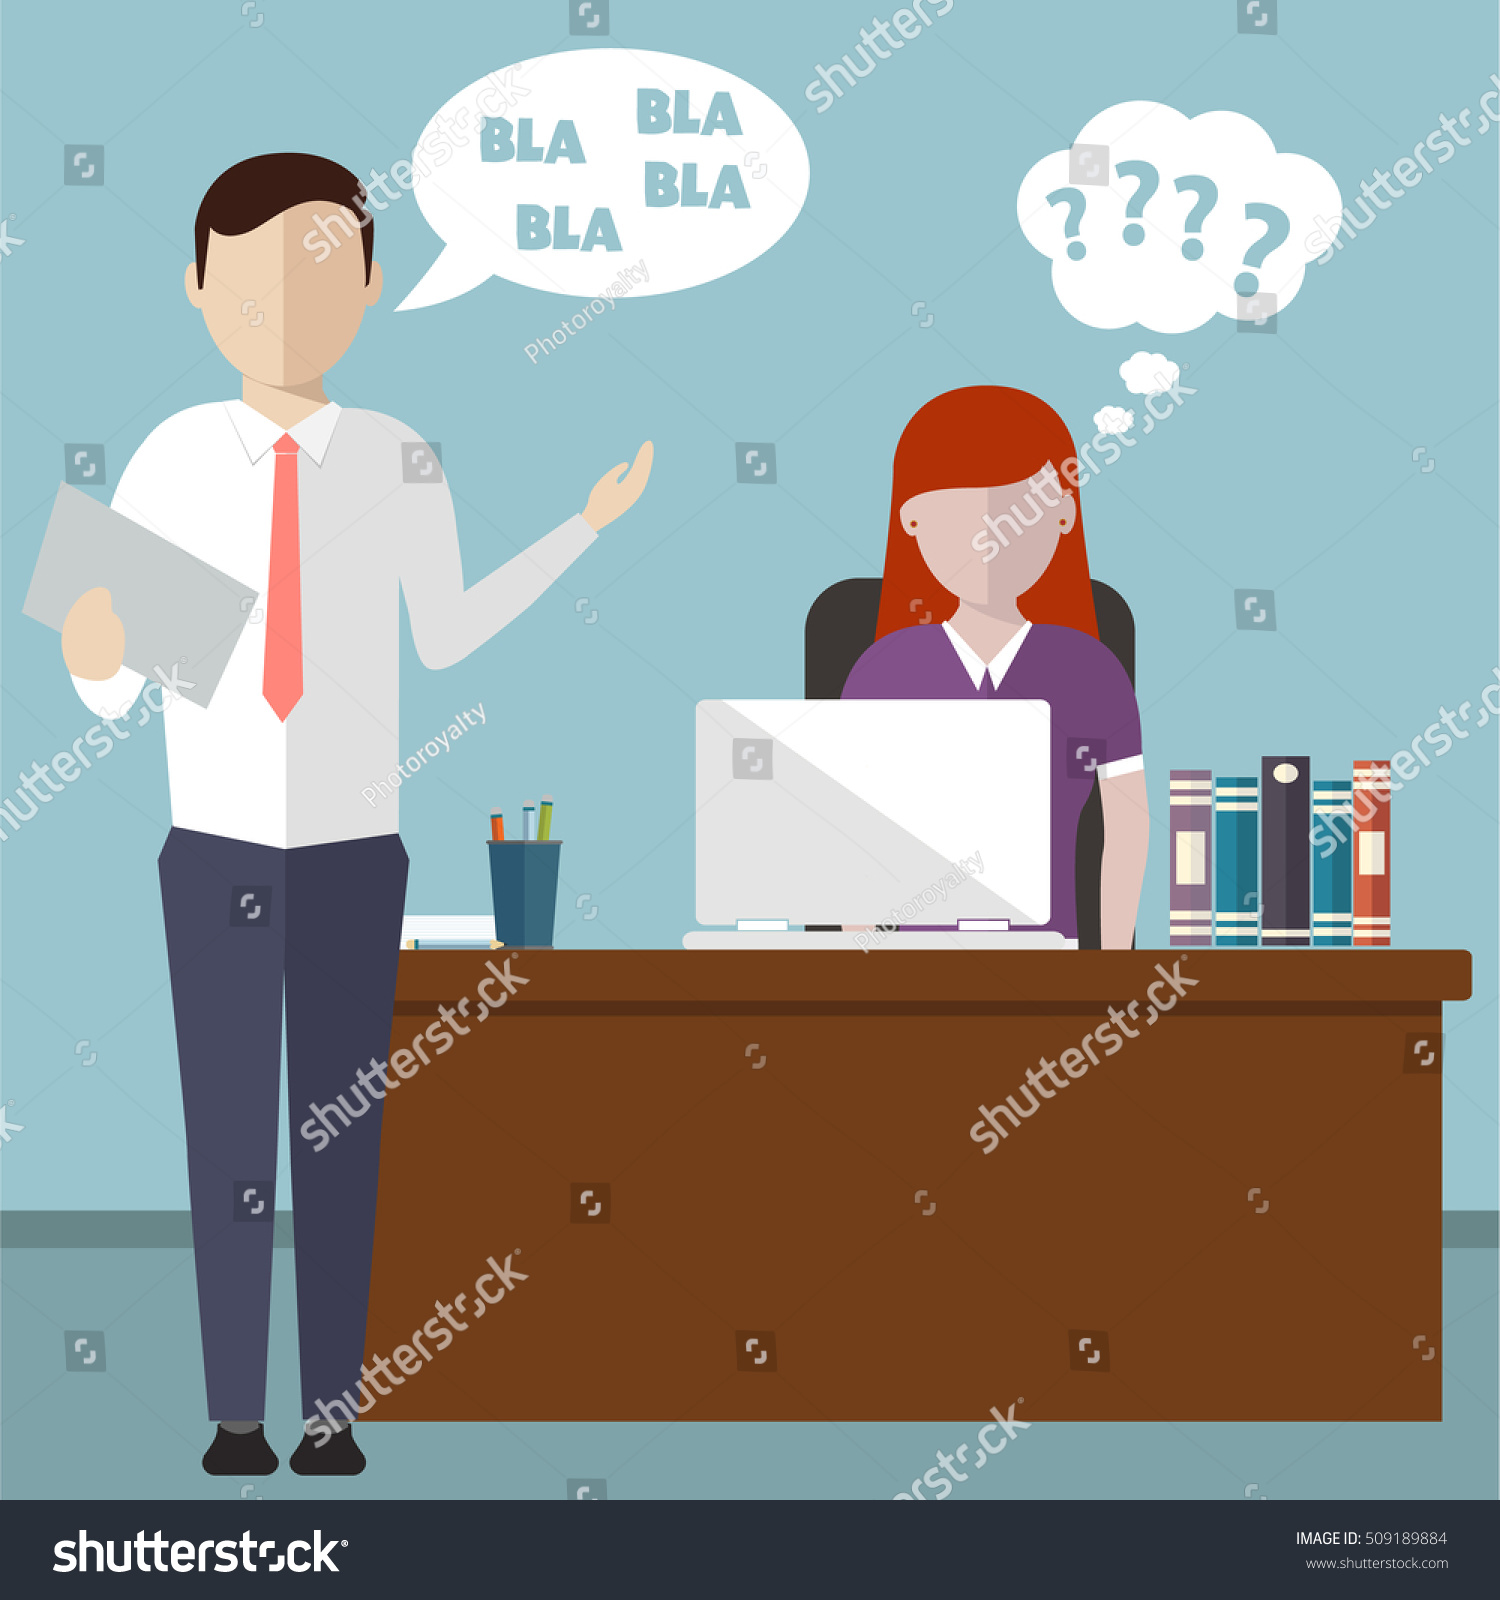 Boss Having An Argument With Employee Over Royalty Free Stock Vector 509189884